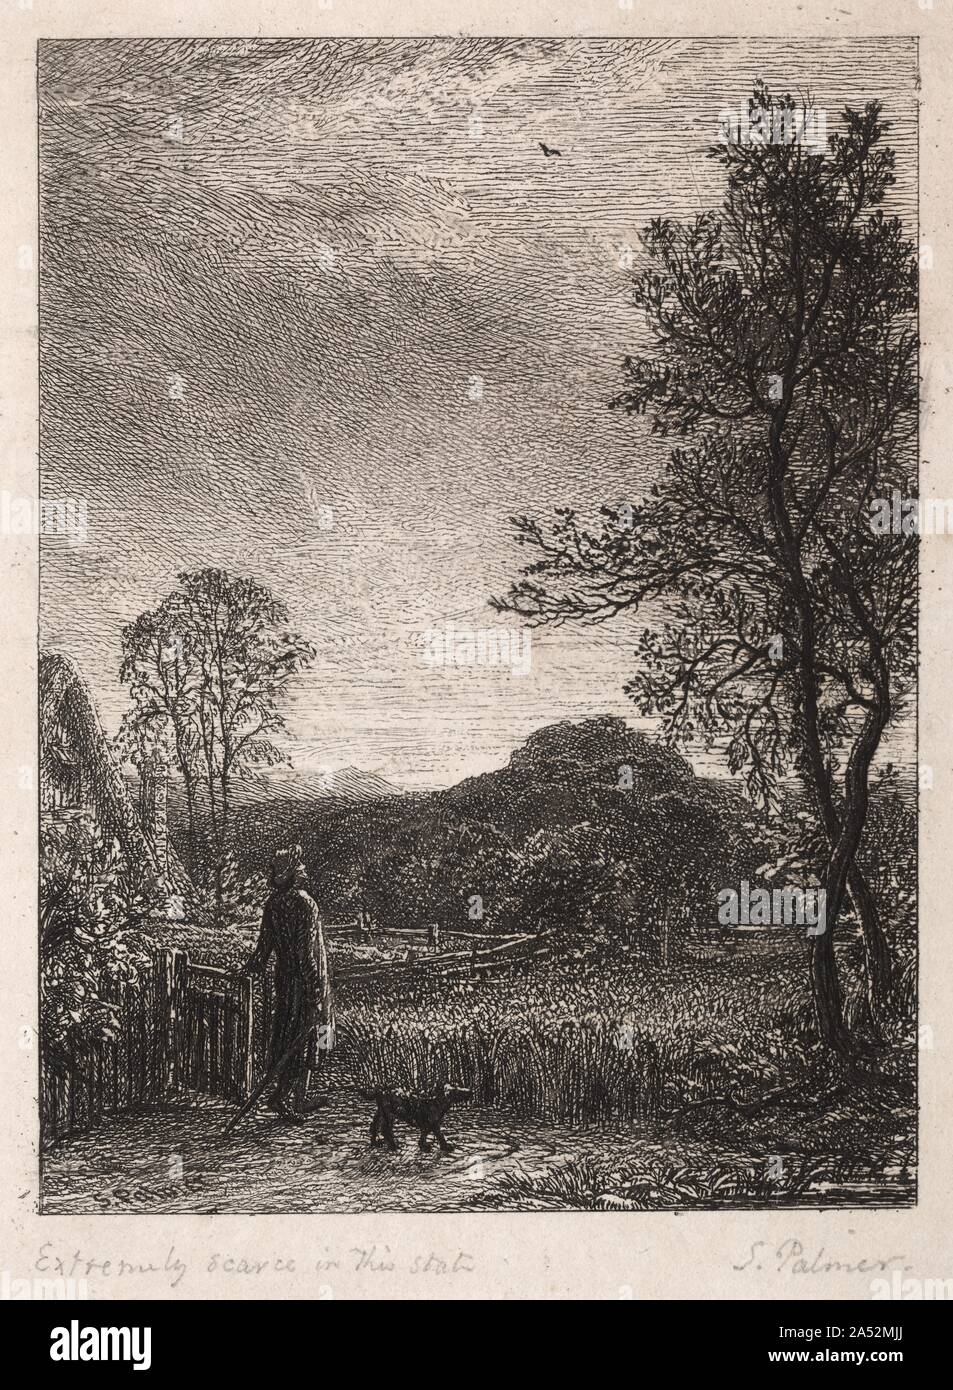 The Skylark, 1850. Palmer came to printmaking relatively late in his career in 1850 when he was elected to the Etching Club in London. He created a significant number of landscape etchings, intricate in detail and sonorous in chiaroscuro. In The Skylark, one of Palmer&#x2019;s earliest compositions, a solitary figure in a rural landscape contemplates the flight of a songbird. Palmer has been compared to the German Romantic artist Caspar David Friedrich (also in this exhibition), who produced images infused with a similarly indefinable atmosphere of calm, mystery, and breathless silence. Stock Photo